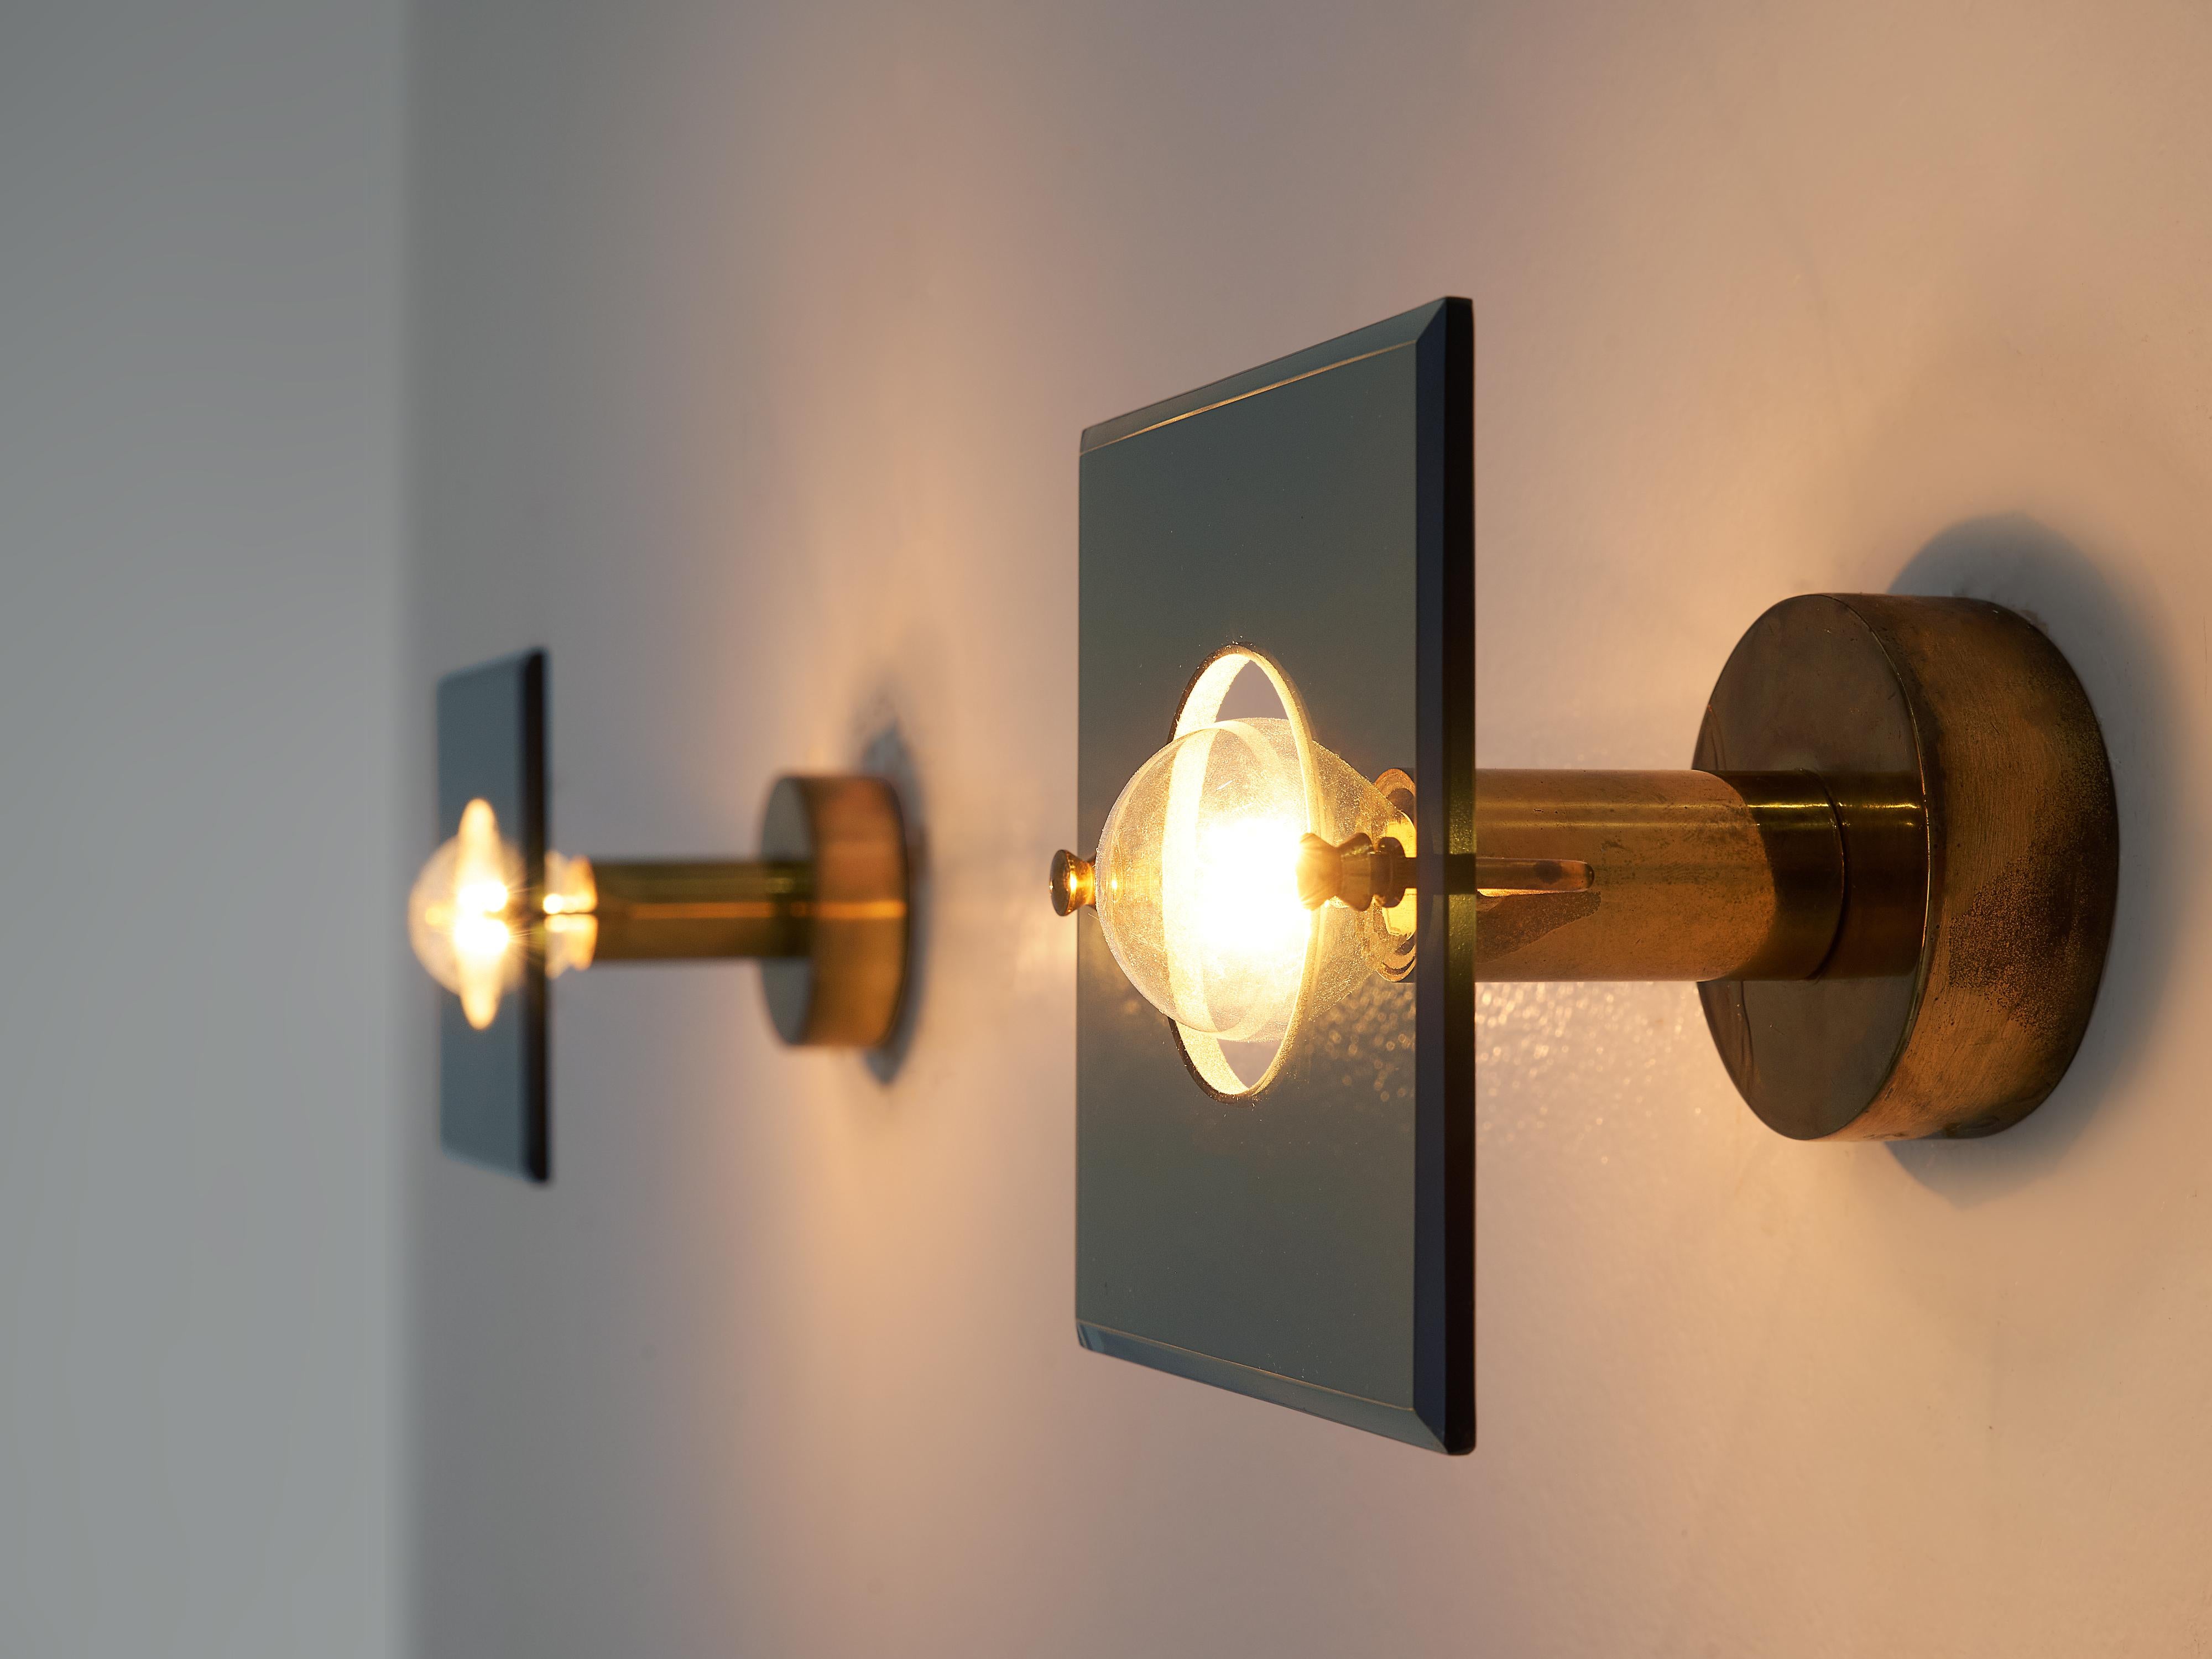 Gino Paroldo, pair of wall lights, brass, glass, Italy, 1960s

Characteristic wall lights by Gino Paroldo. Like the chandeliers by Paroldo also this wall lamp features a square plate in smoked glass. The lightbulb reaches through the circular gap